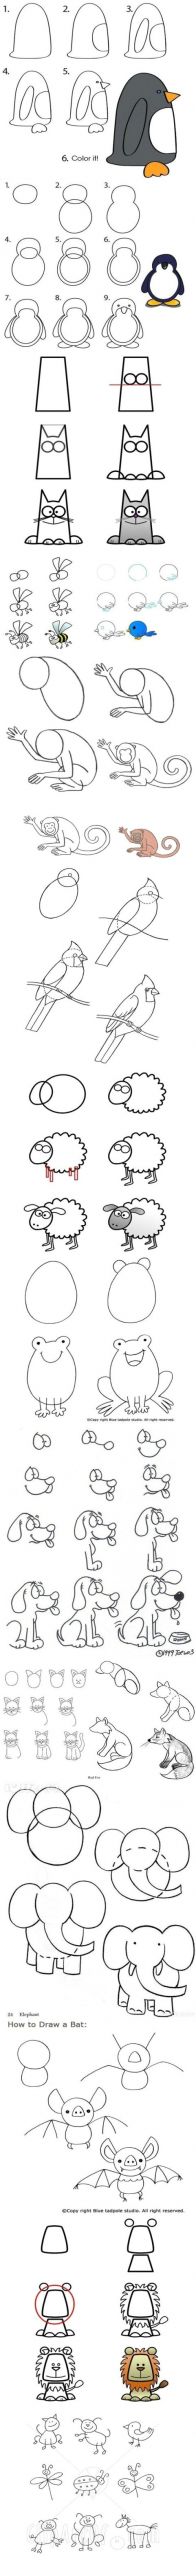 Draw 50 Animals Cool Thing to Draw 50 Cool and Easy Things to Draw when